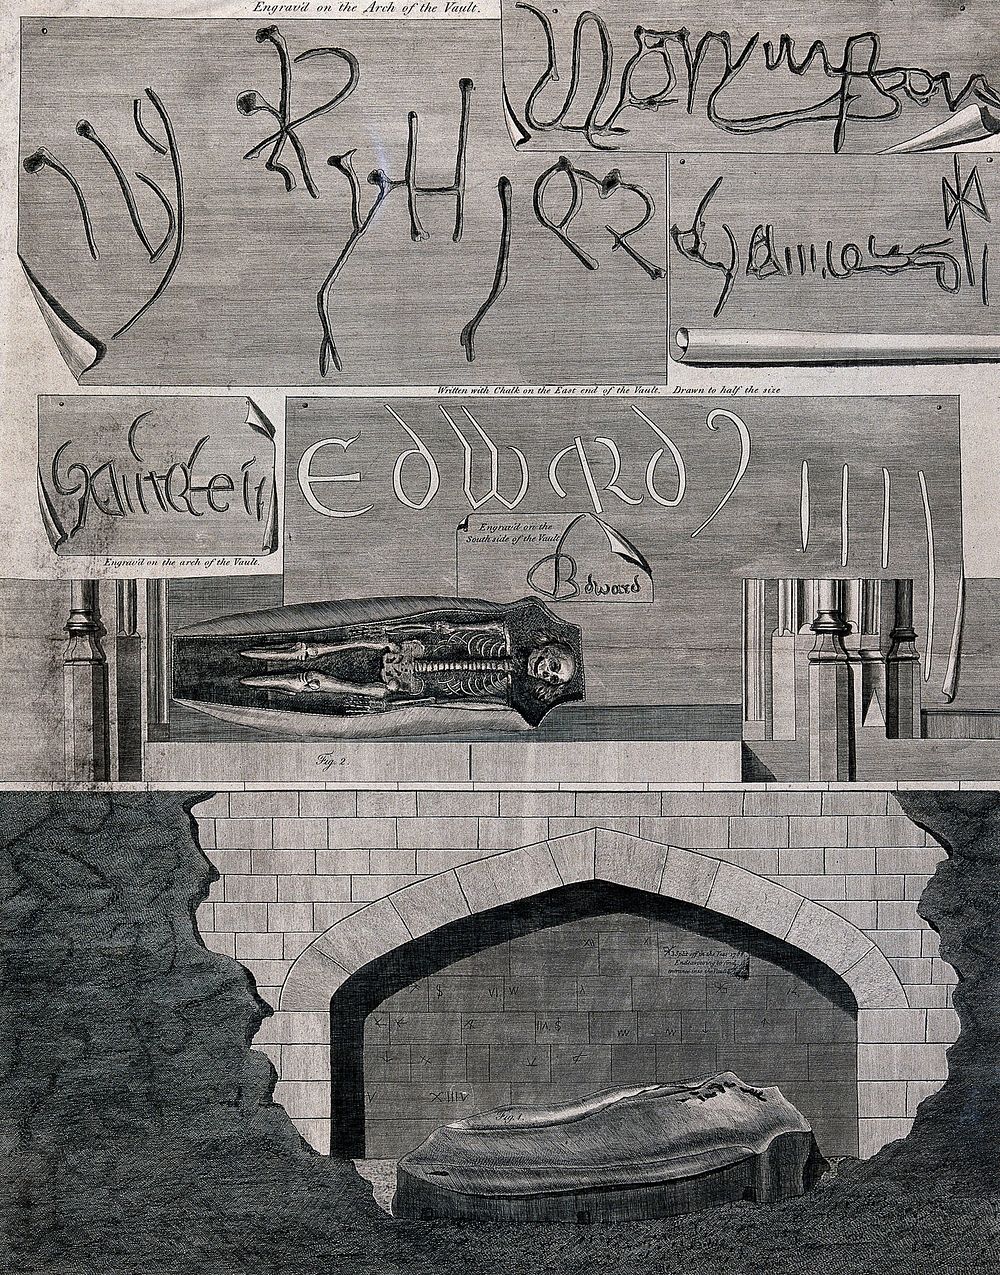 The tomb of Edward II, with various cross-sections of the vaults. Etching with engraving by Basire after H. Emlyn, 1790.